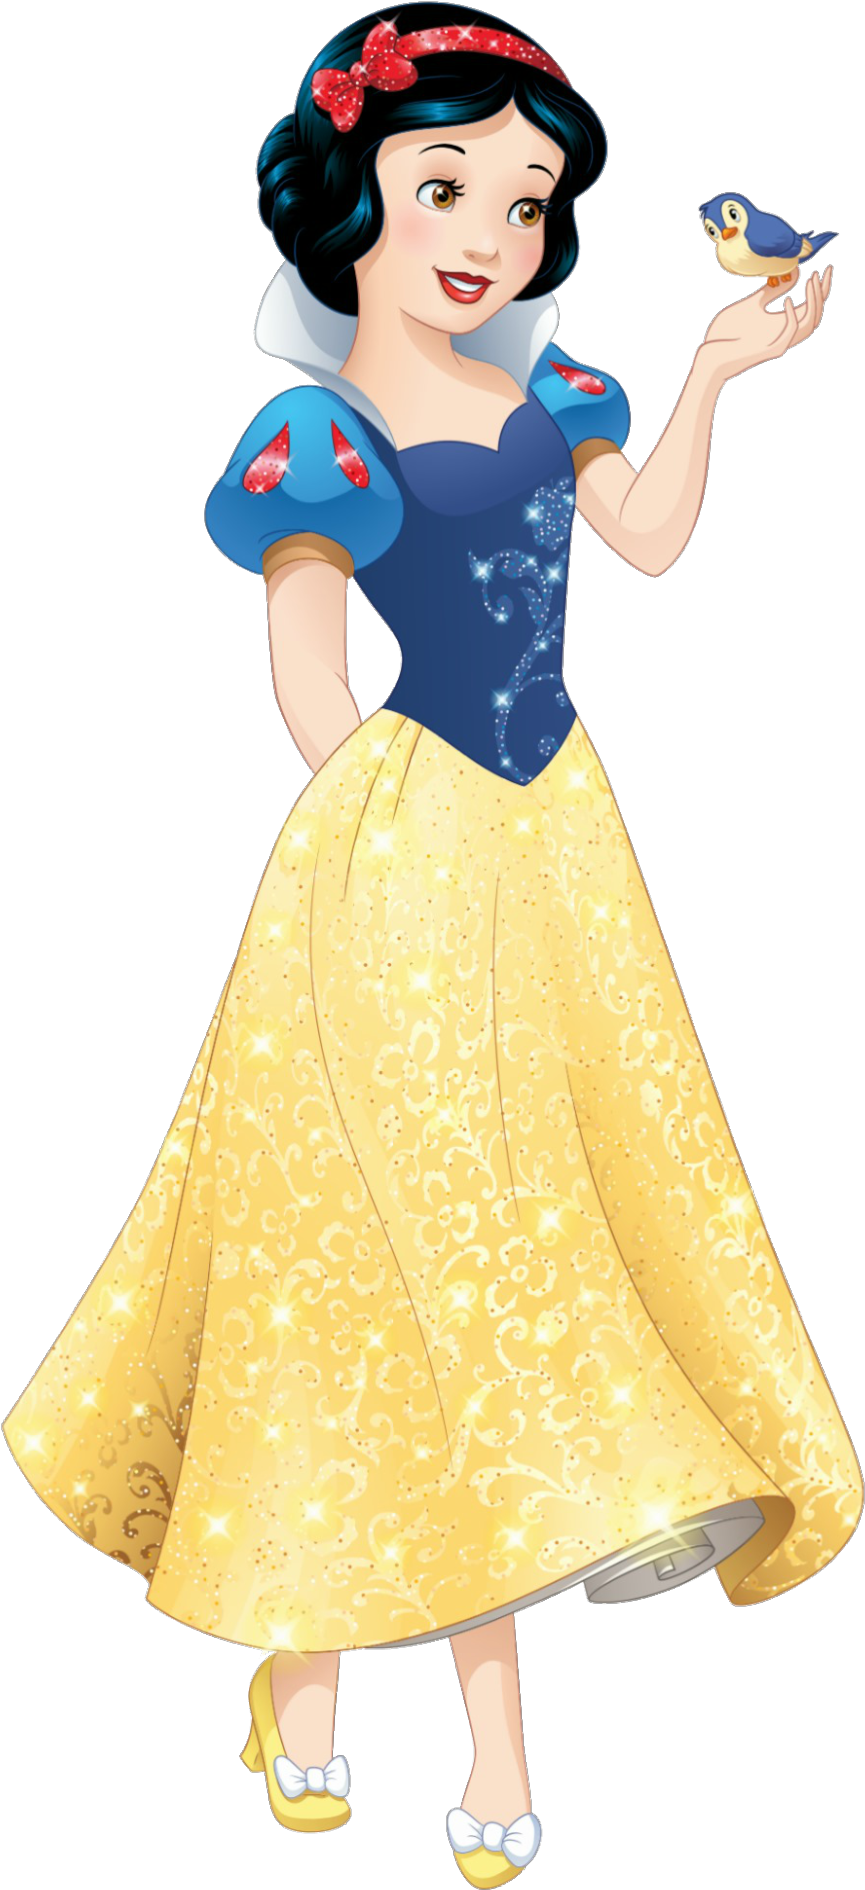 Snow White Princess Background Image PNG